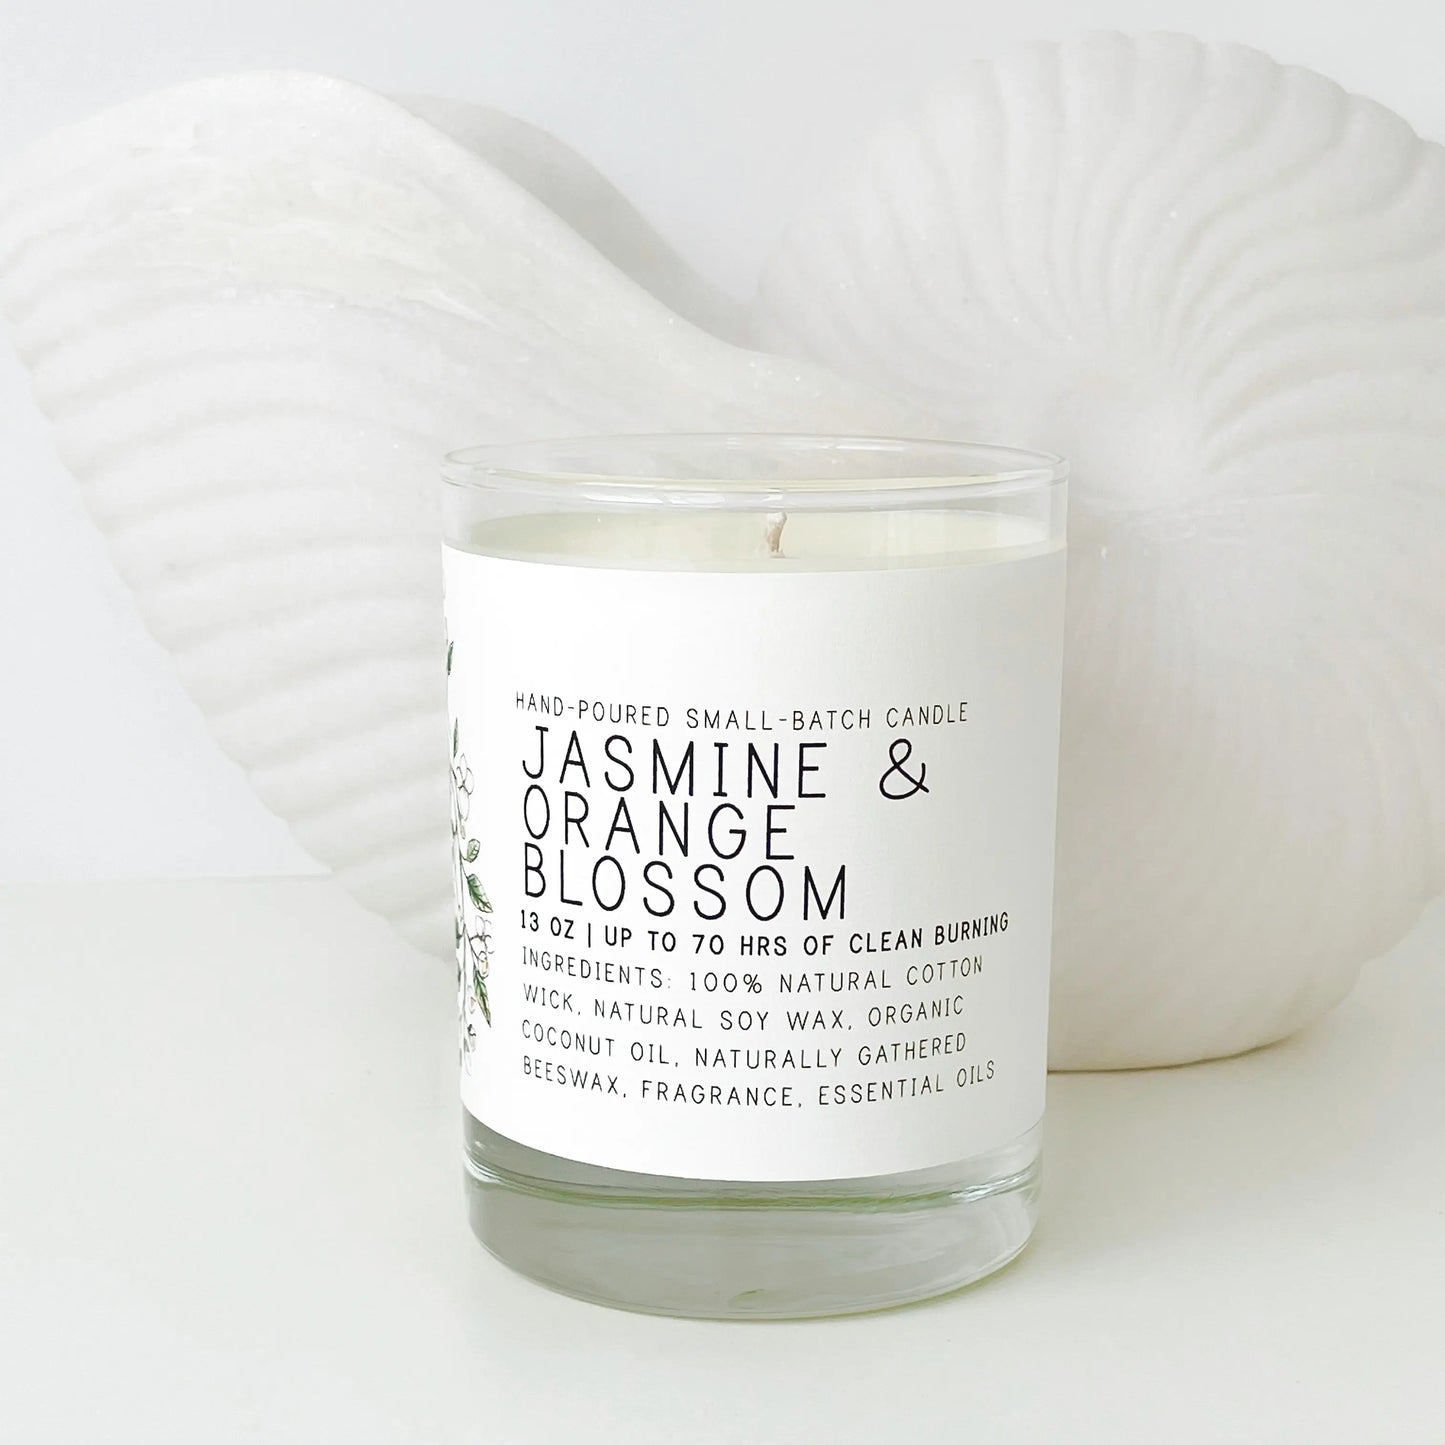 Jasmine and Orange Blossom Candle - Just Bee Candles Just Bee Cosmetics